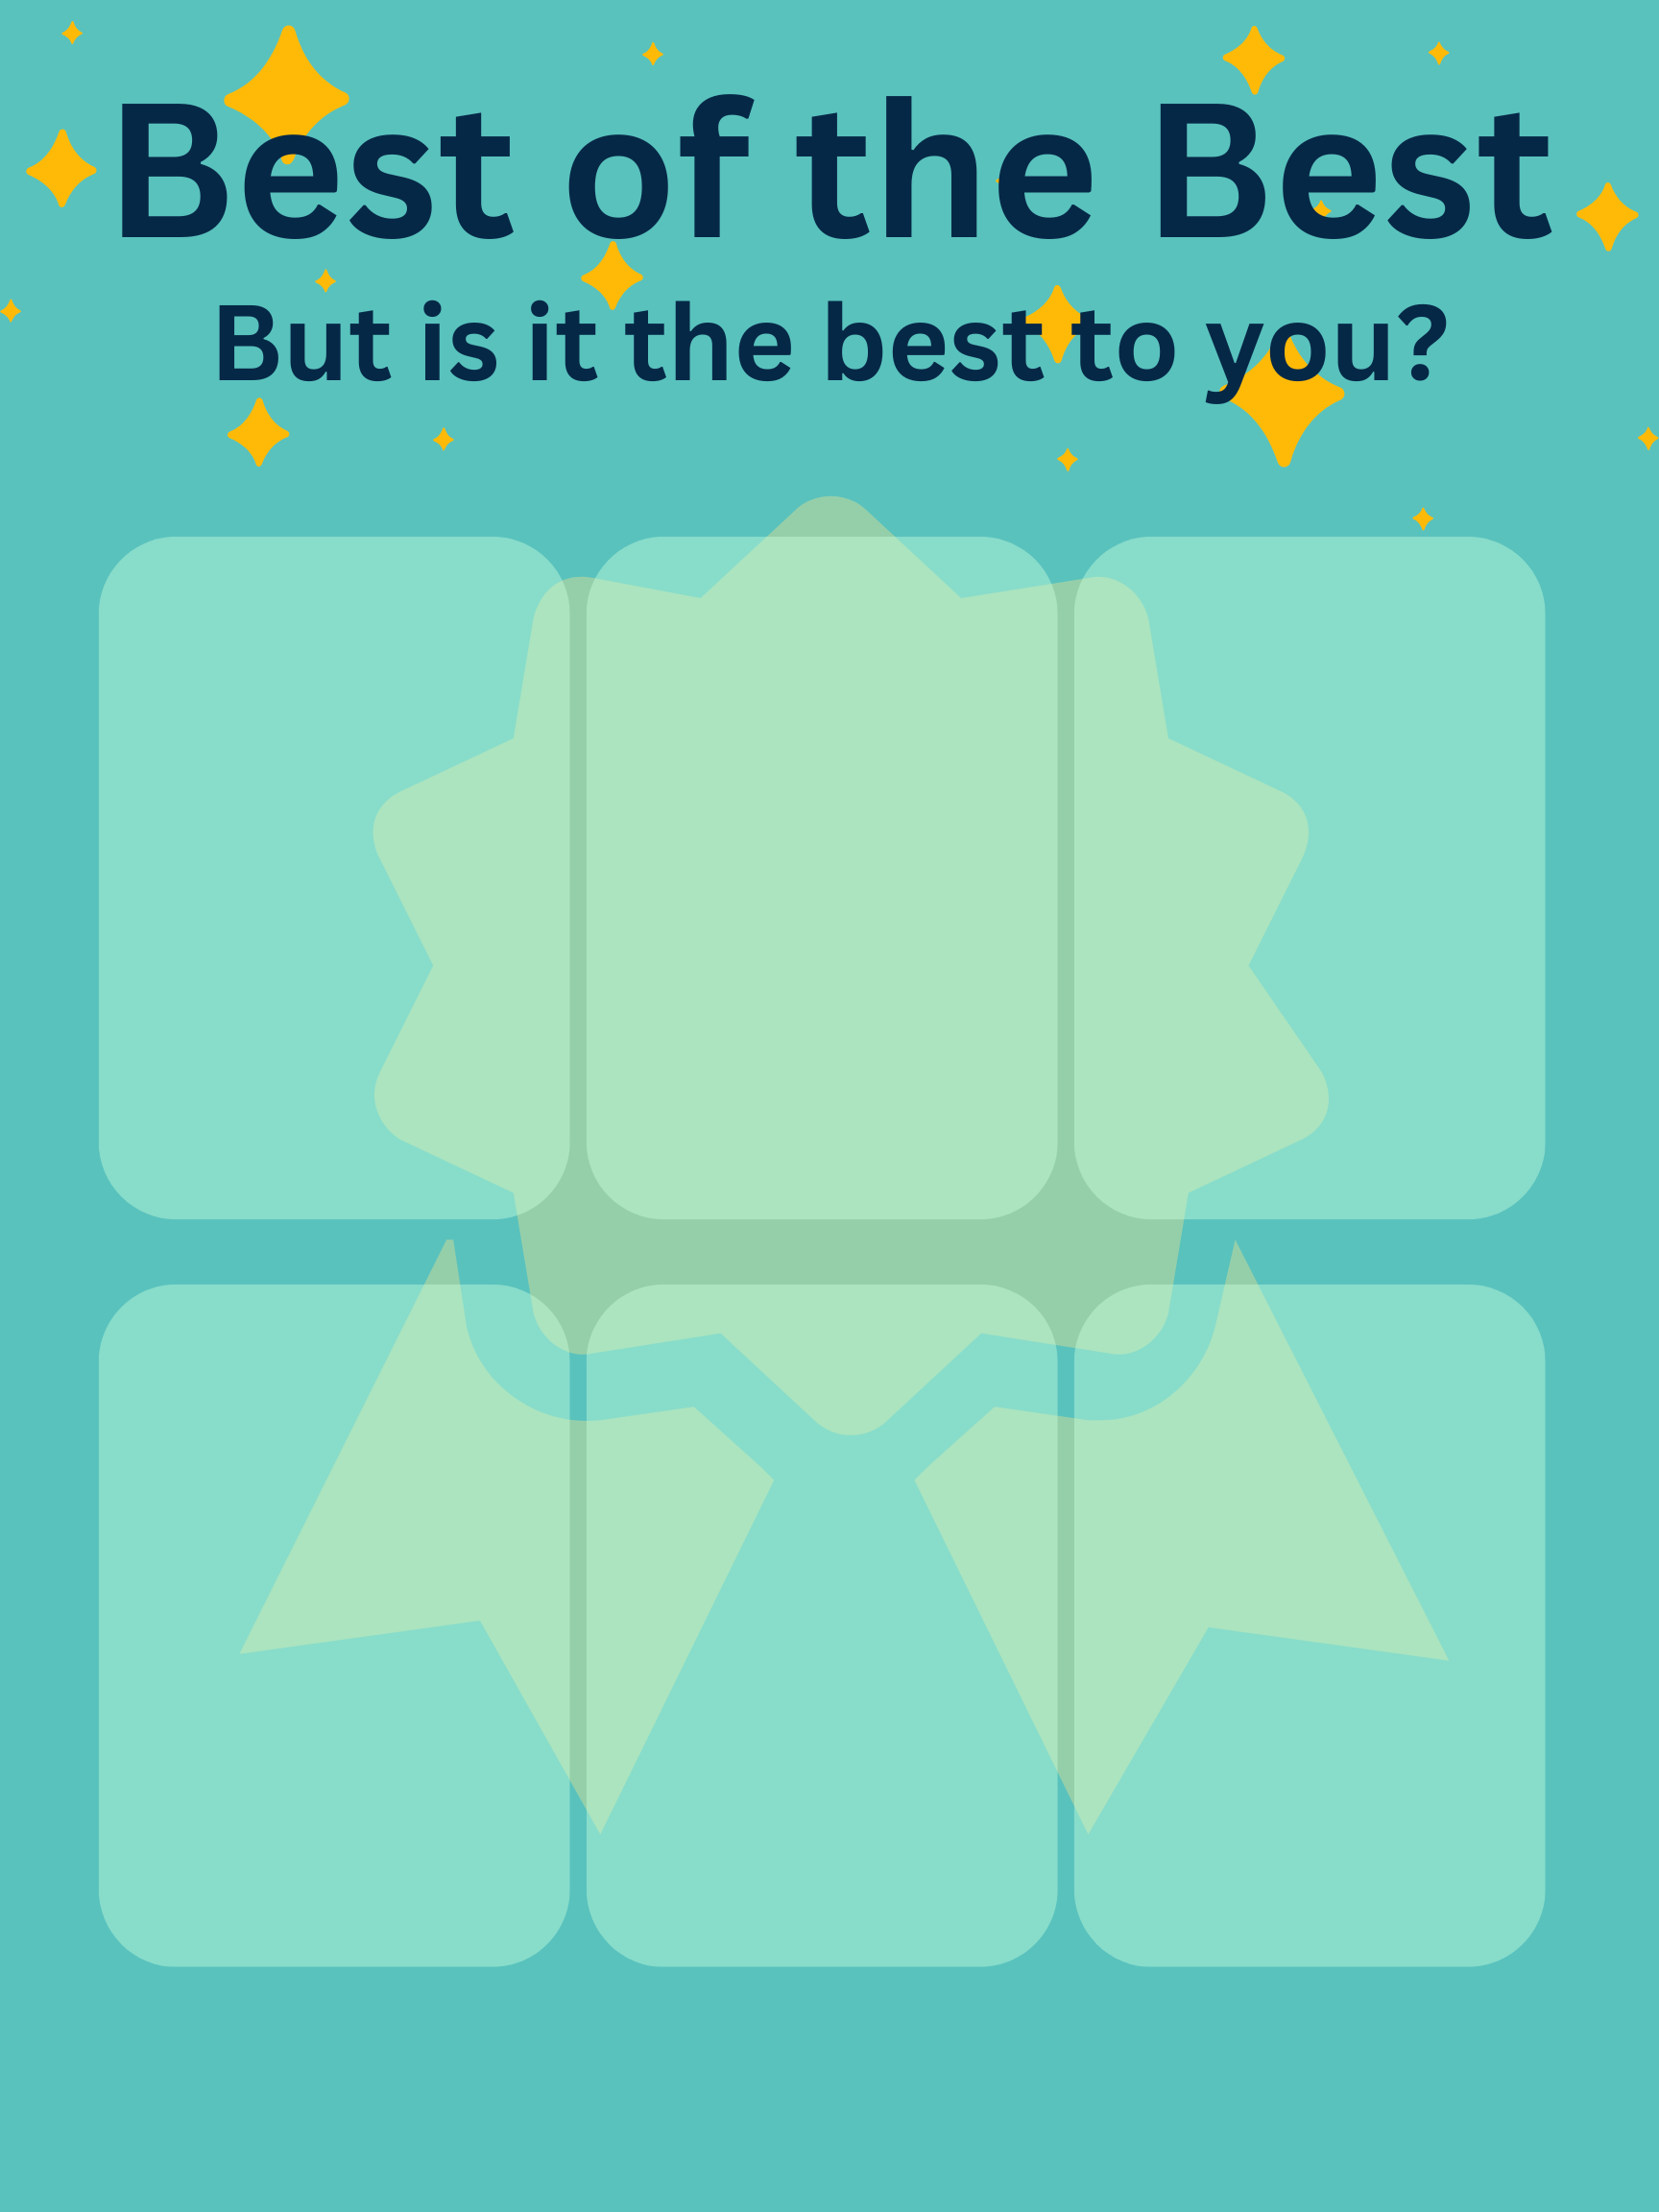 Blue and Green sheet with empty slots on it to add text for. Reads Best of the Best Challenge